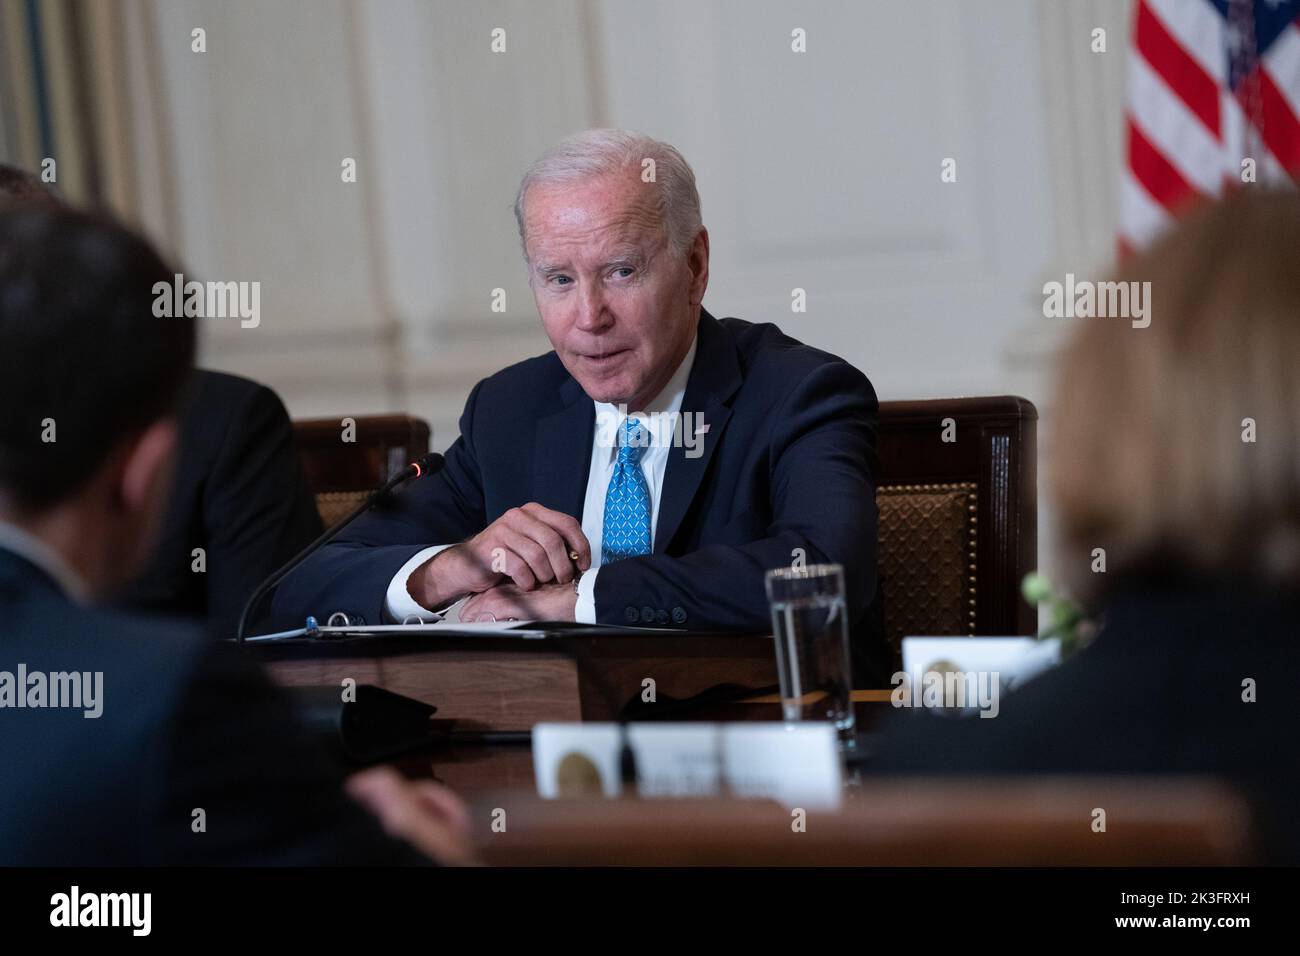 Washington, United States. 26th Sep, 2022. United States President Joe Biden delivers remarks at the third meeting of the White House Competition Council highlighting the progress made on the competition agenda at the White House in Washington, DC on Monday, September 26, 2022. The White House believes lack of competition drives up prices for consumers and drives down wages for workers. Photo by Chris Kleponis/UPI Credit: UPI/Alamy Live News Stock Photo